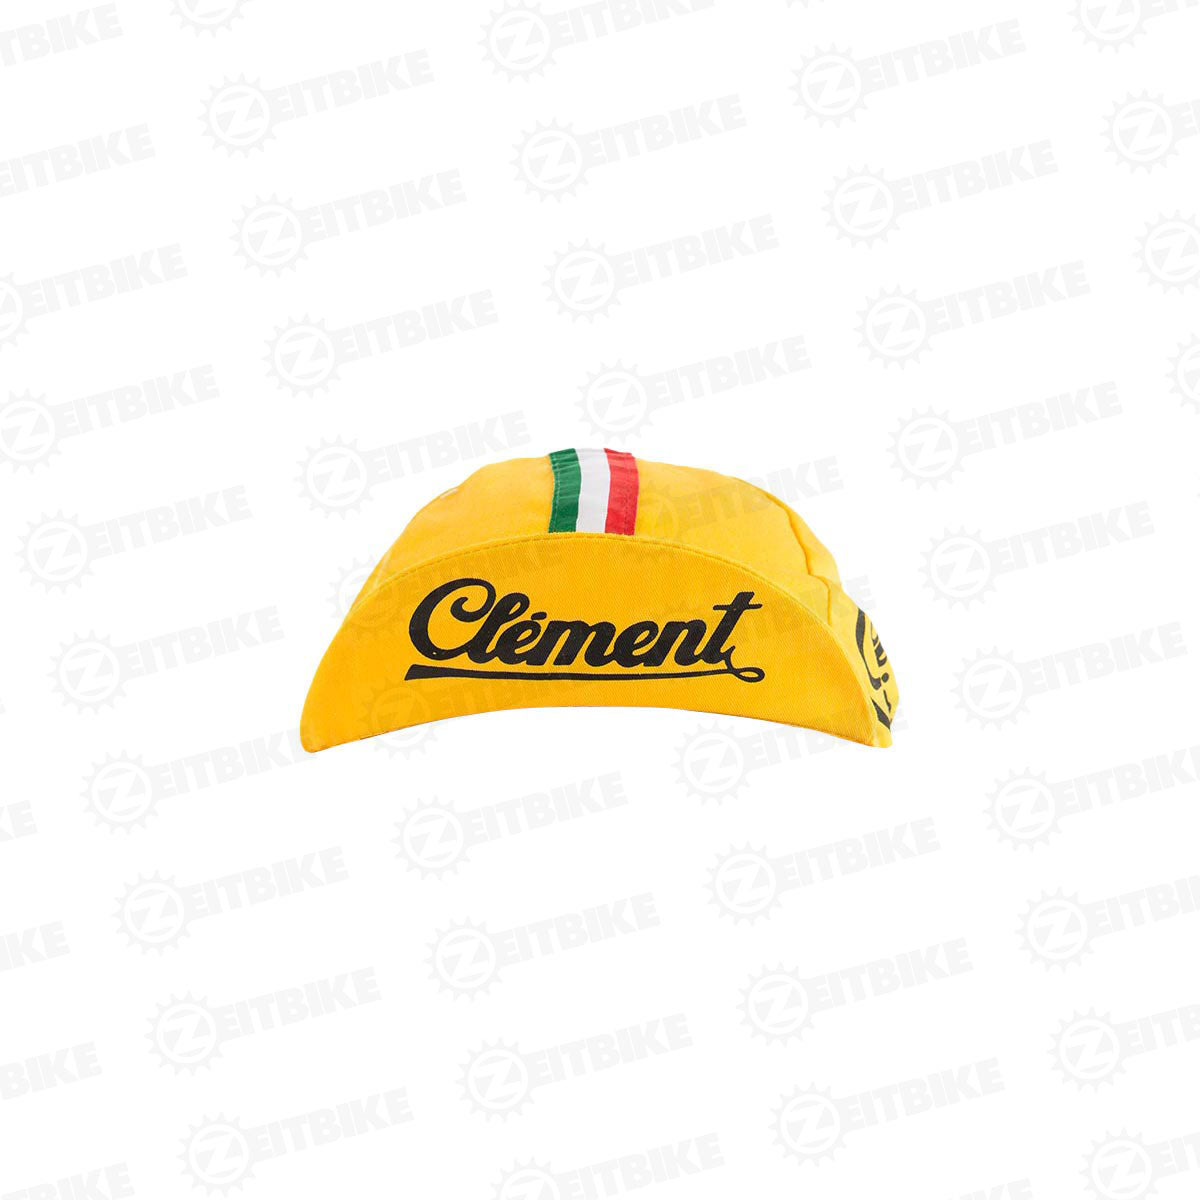 ZEITBIKE - Vintage Cycling Cap - Clement  | Anti Sweat Caps | for Stand Alone or Under Helmet | Team Jersey Cap Outdoor Cap